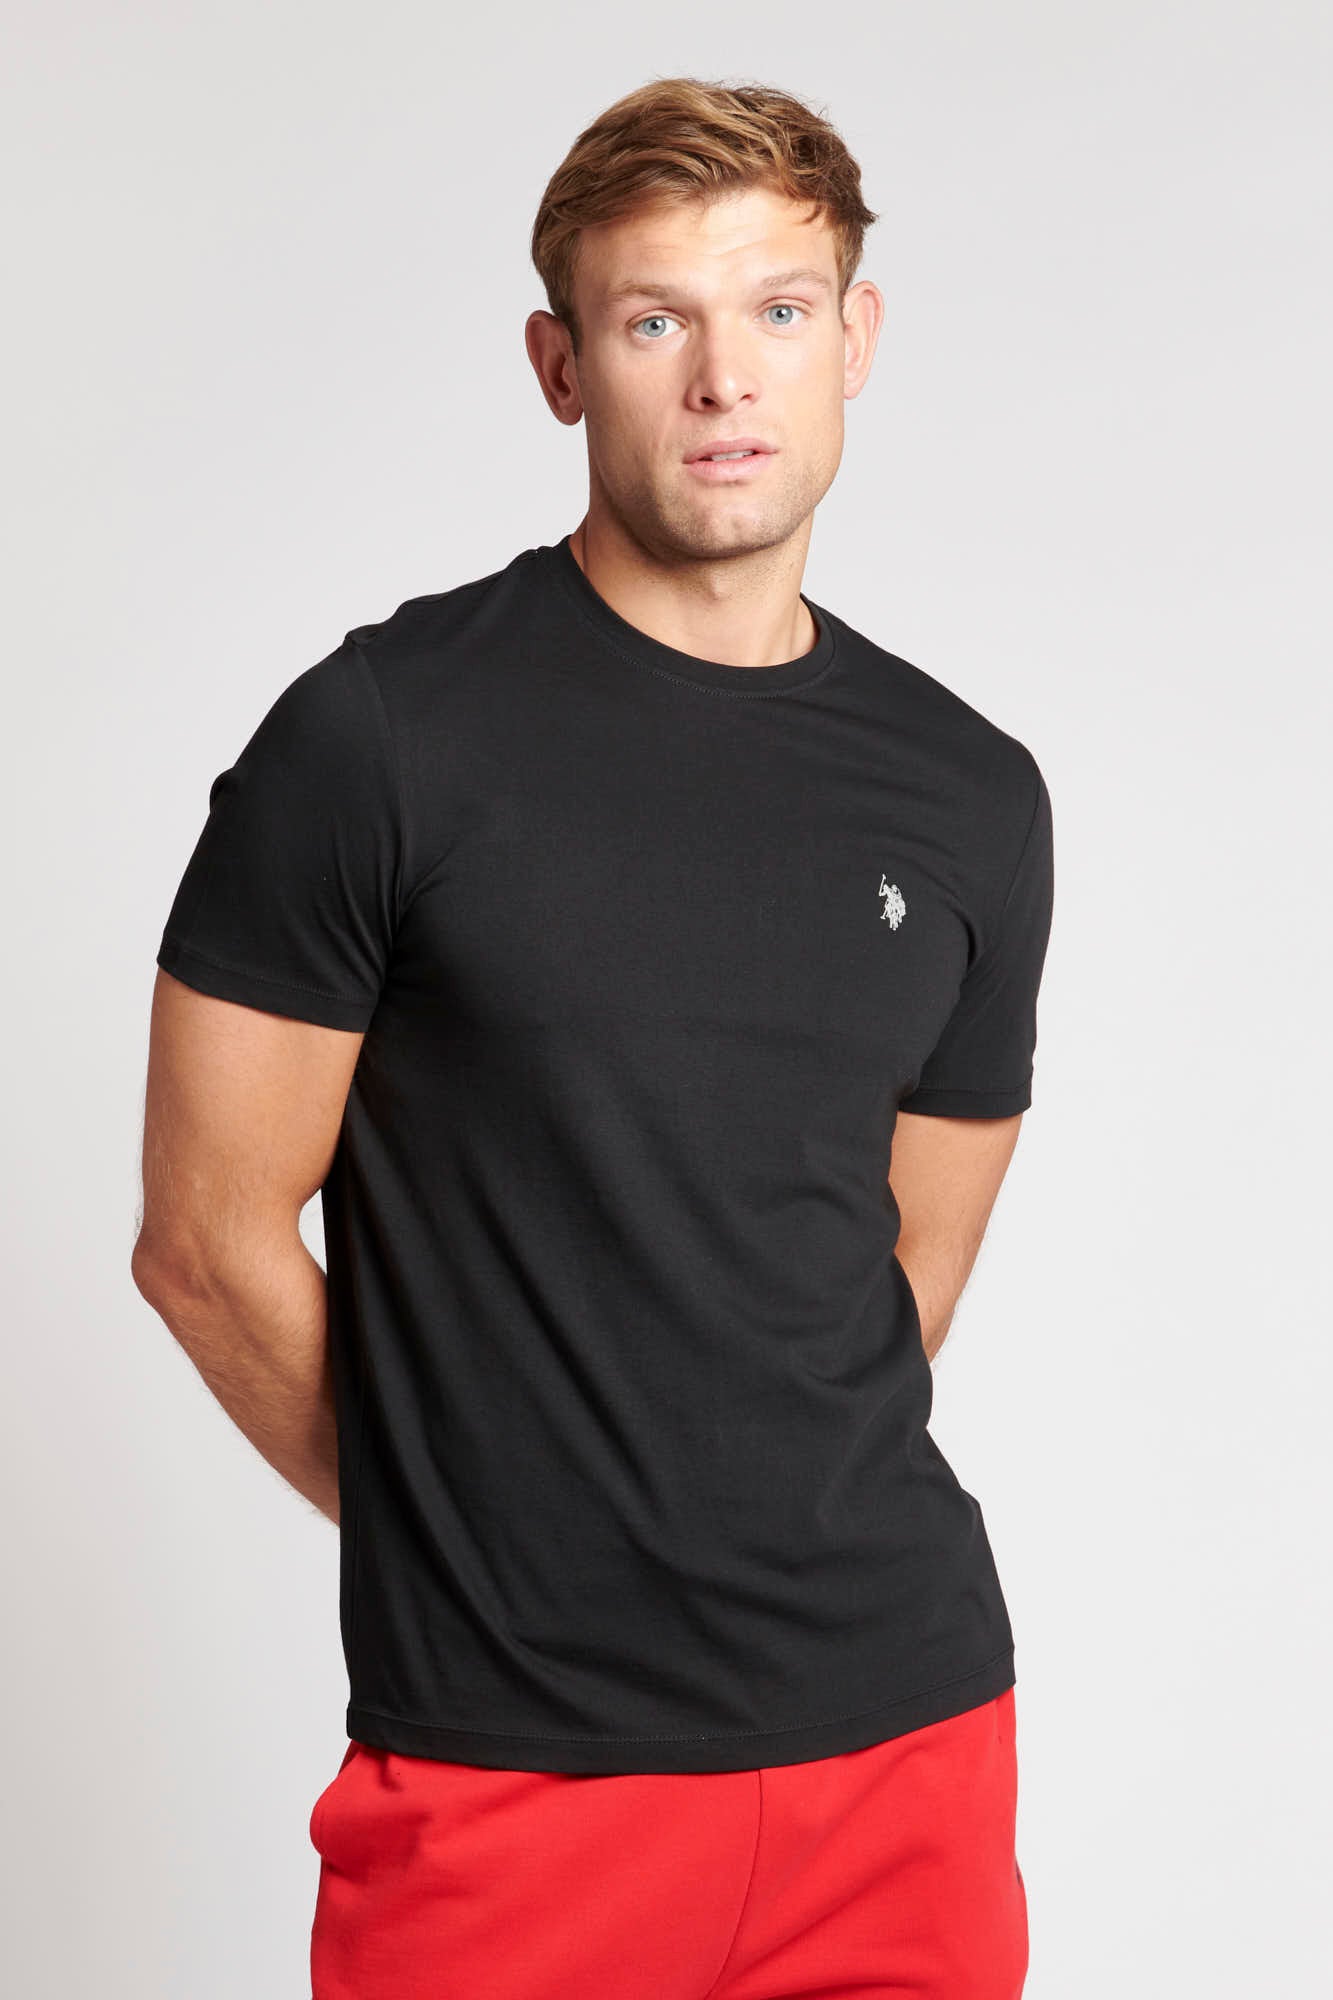 Mens 2 Pack Lounge T-Shirts in Black